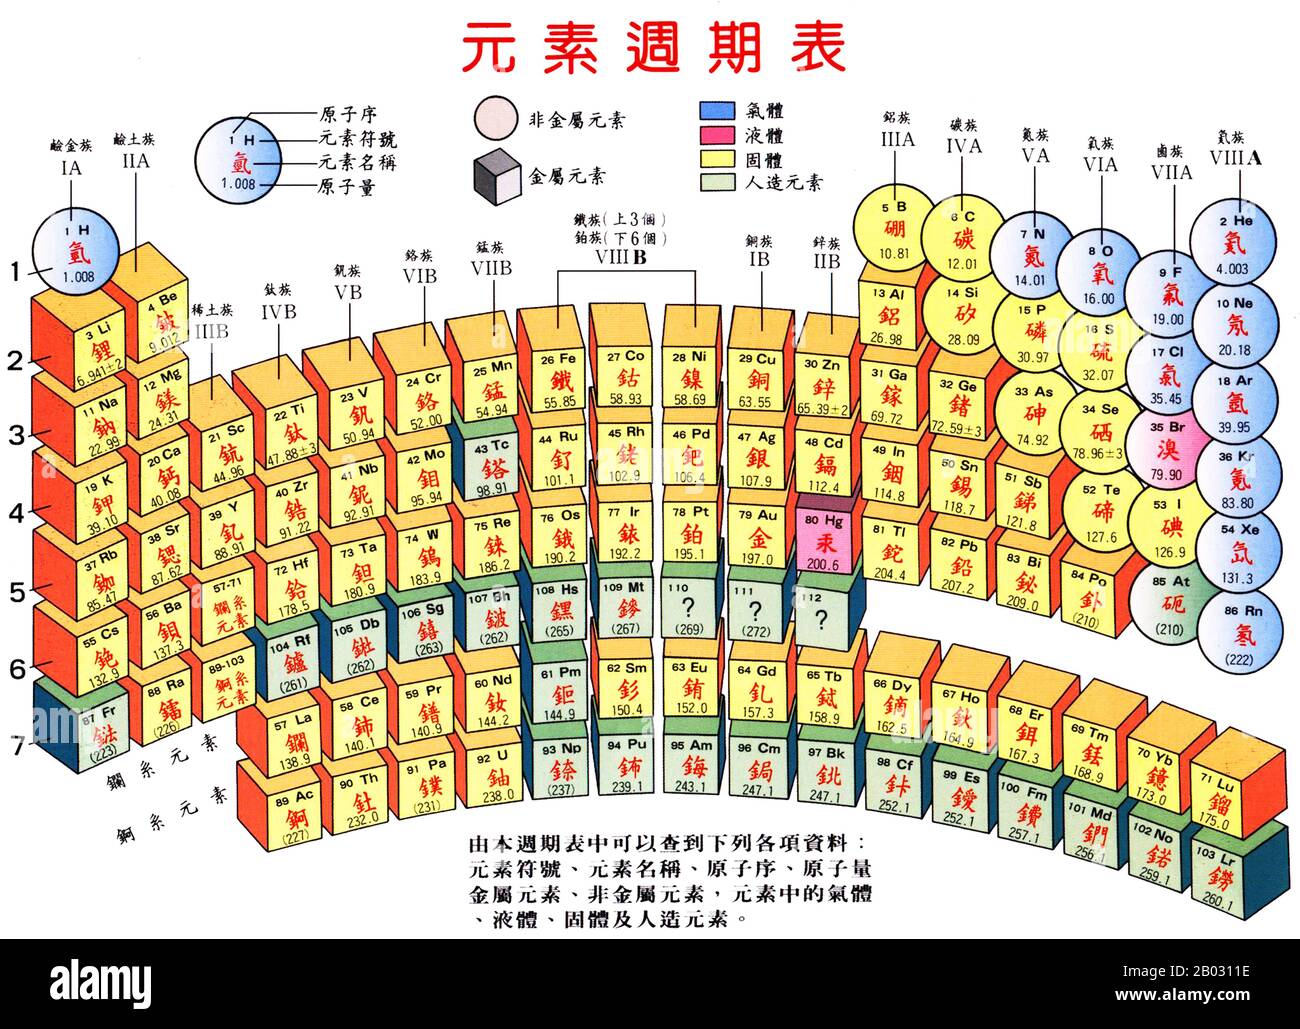 Periodic Table of Elements, China. The periodic table is a tabular arrangement of the chemical elements, ordered by their atomic number (number of protons in the nucleus), electron configurations, and recurring chemical properties. The table also shows four rectangular blocks: s-, p- d- and f-block. In general, within one row (period) the elements are metals on the left hand side, and non-metals on the right hand side. Stock Photo